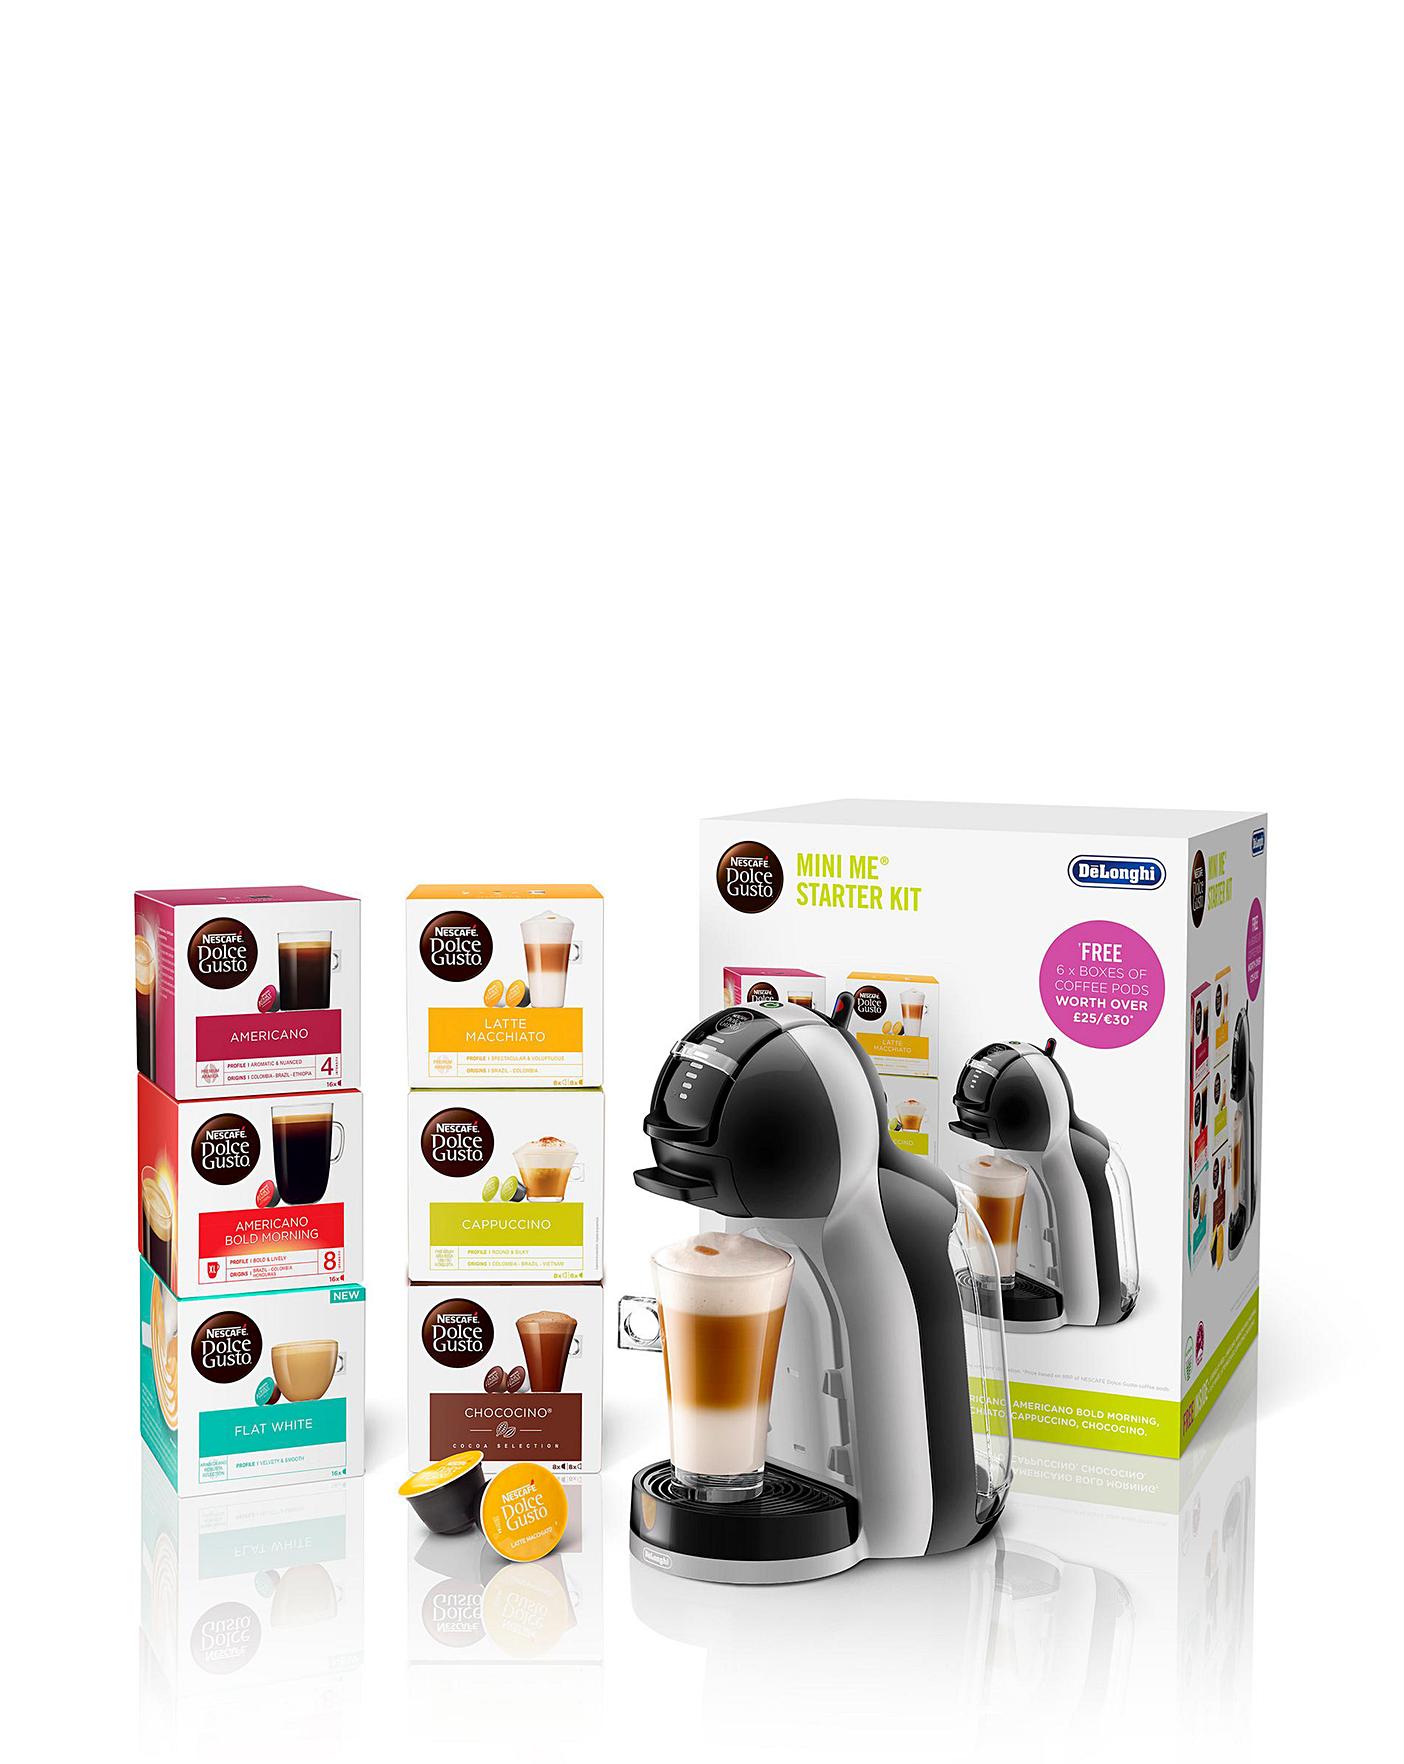 NESCAFE DOLCE GUSTO COFFEE PODS CAPSULES - BUY ANY 3 BOXES & GET FREE UK  POST